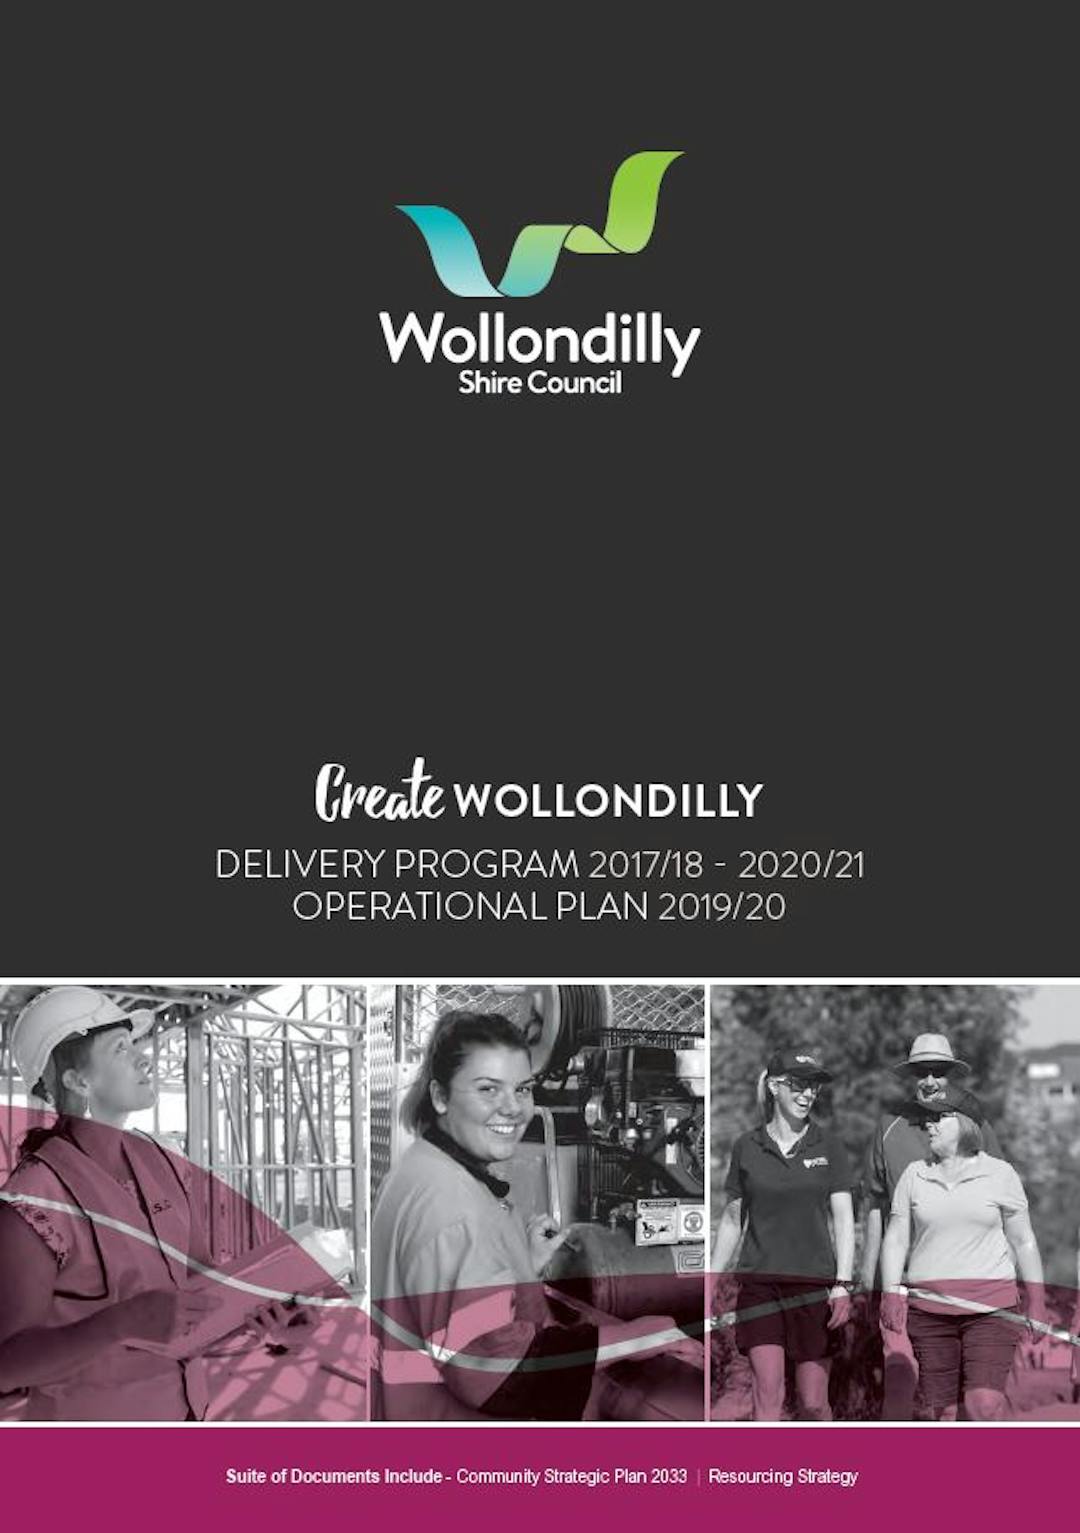 Image of cover page of Create Wollondilly Delivery Program and Operational Plan. Includes Wollondilly Shire Council logo and three images of Council staff performing their work.